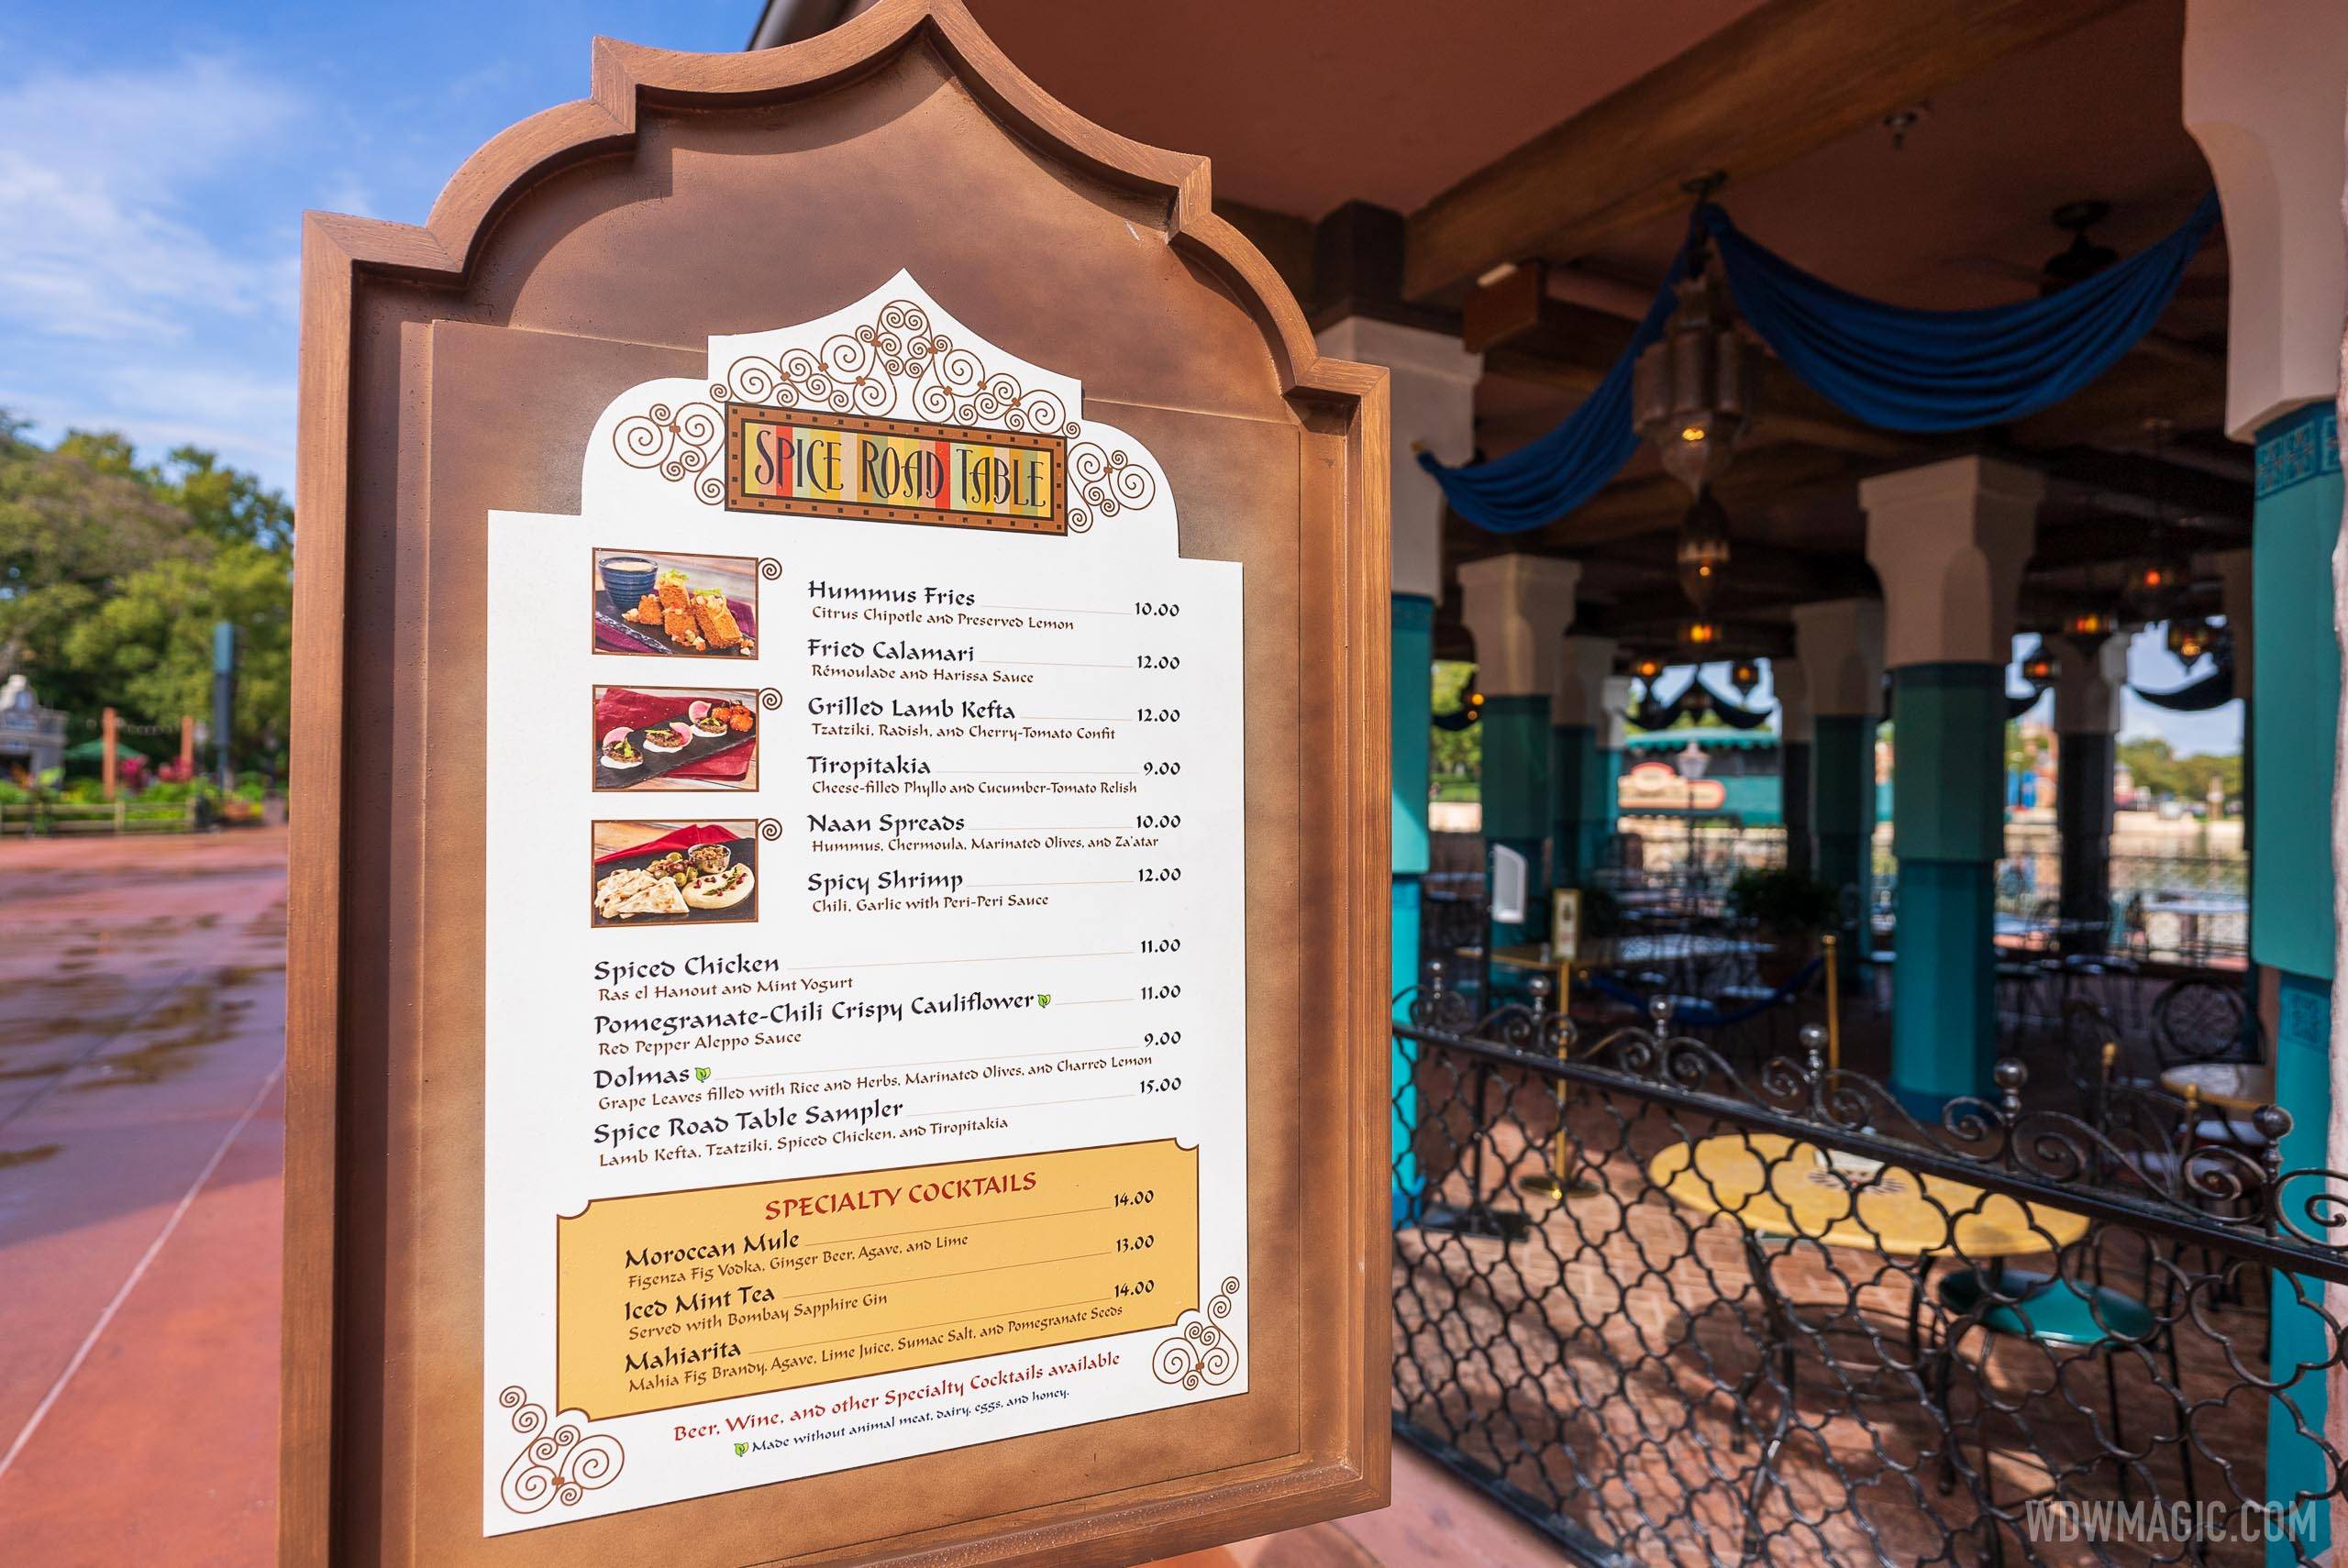 Passholder discount now available at Spice Road Table for a limited time